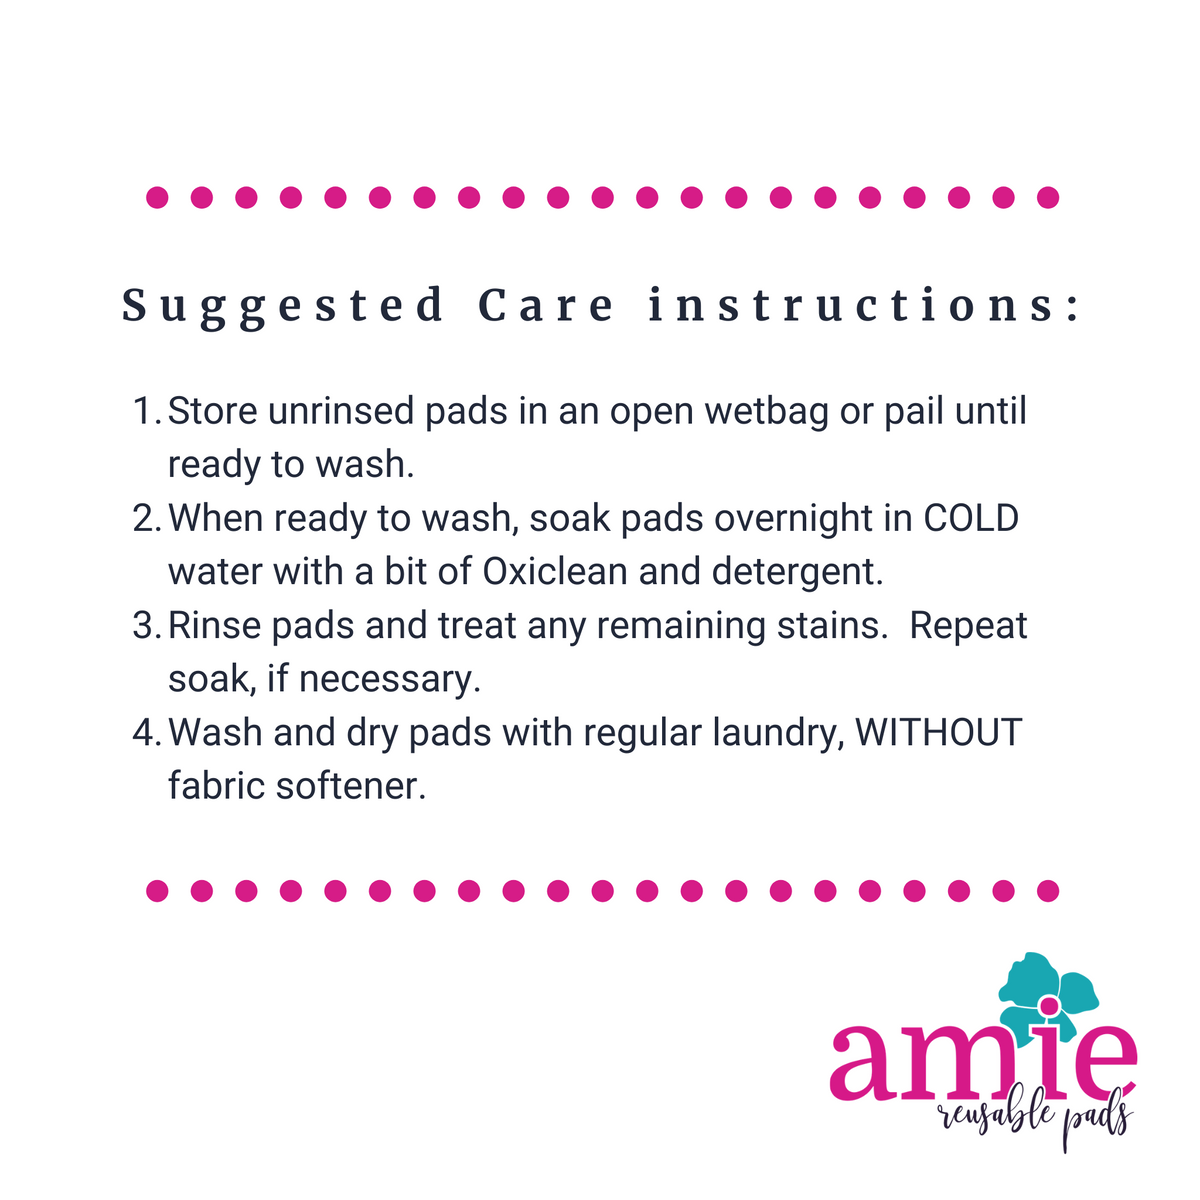 Amie Pads suggested care instructions for washing reusable pads